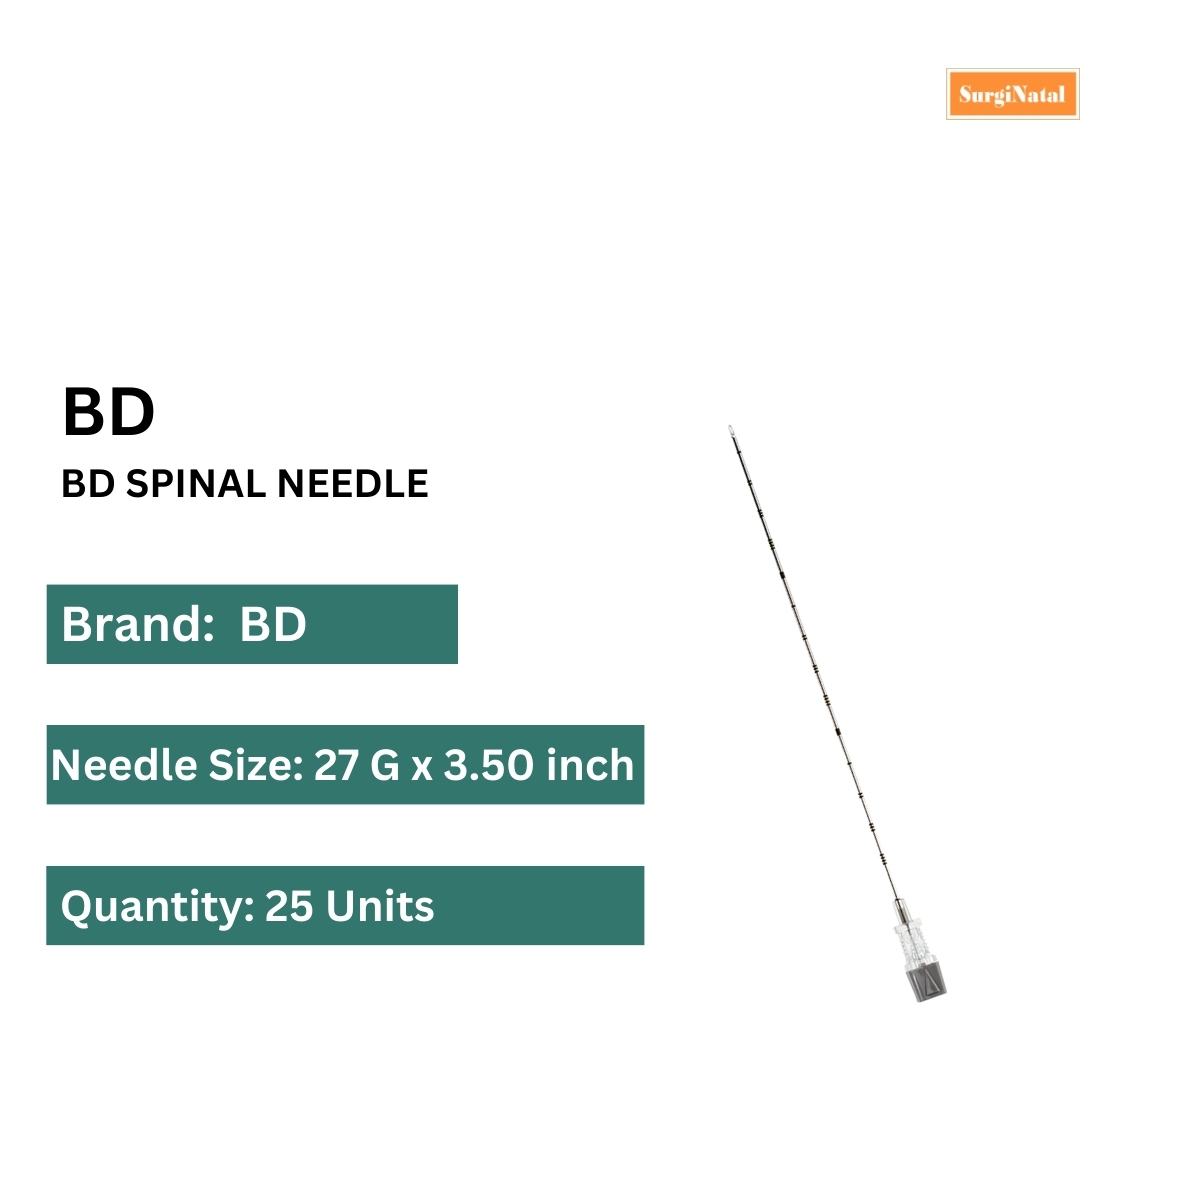 bd whitacre spinal needles: 27g * 3.50in (0.40 mm * 90 mm)